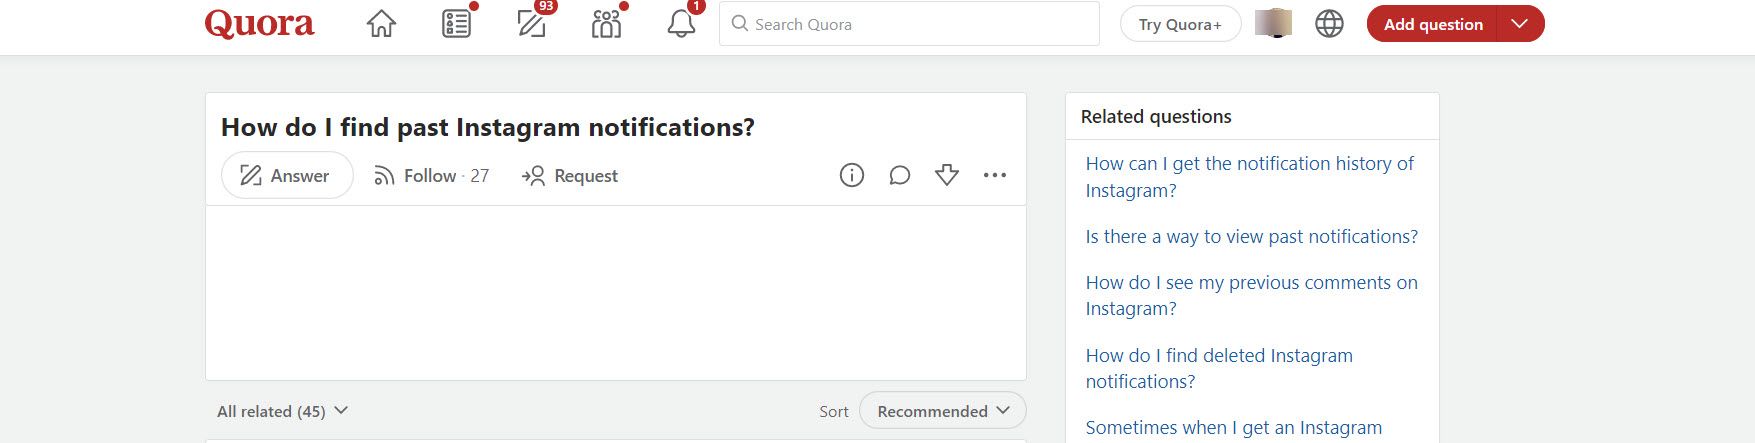 How do I find past Instagram notifications? This is a question on Quora.